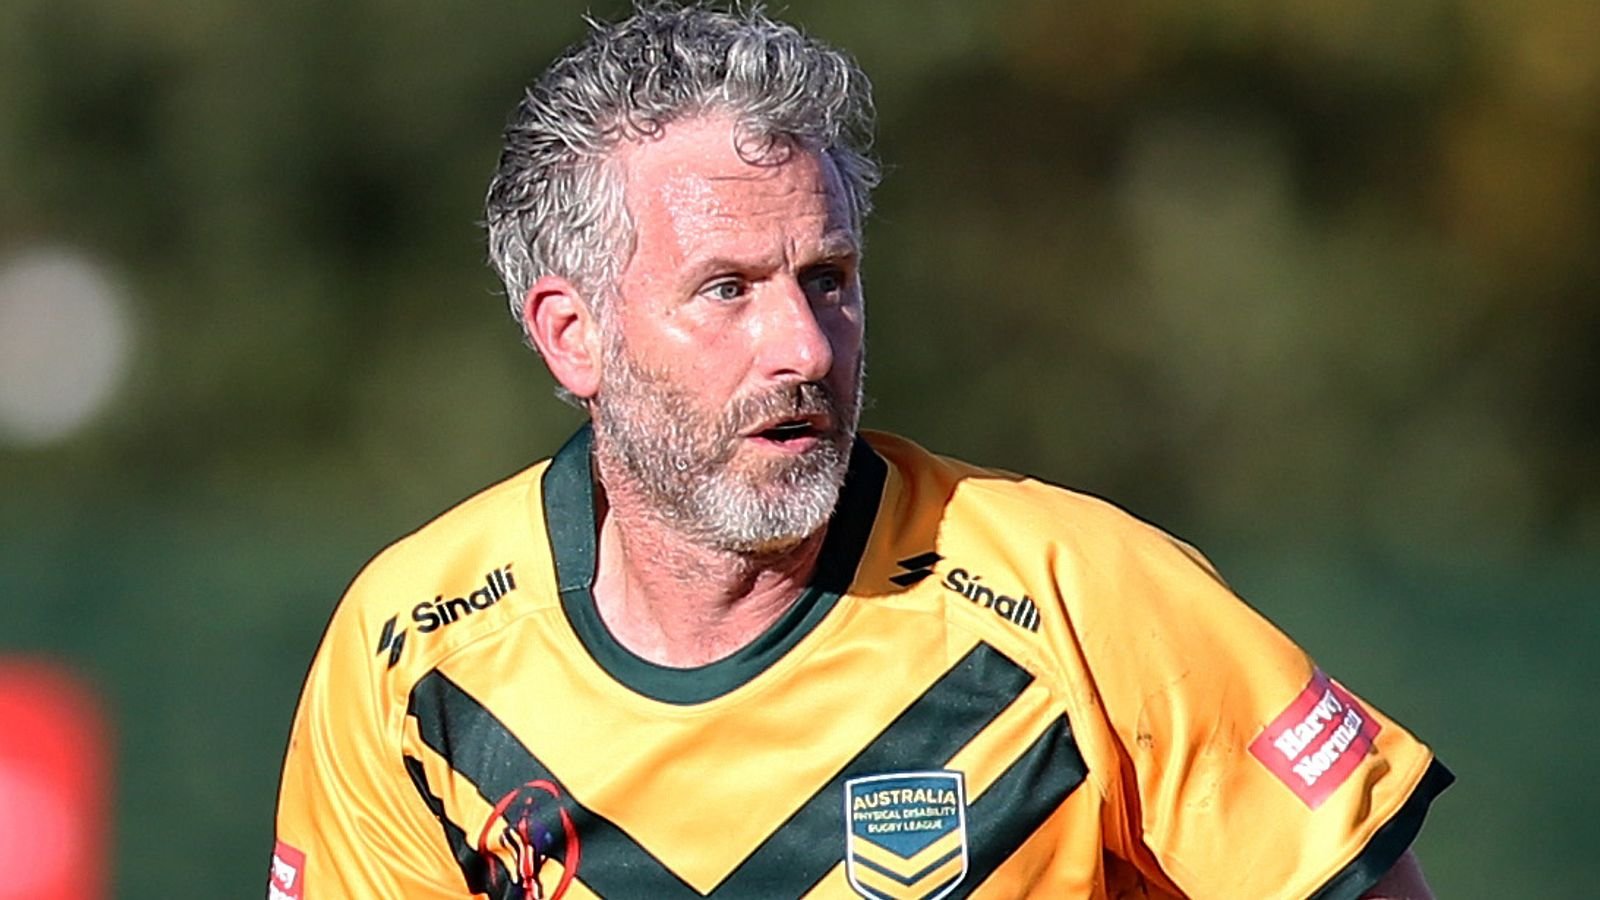 Adam Hills: Comedian and broadcaster to become next Rugby Football League president, succeeding Sir Lindsay Hoyle | Rugby League News